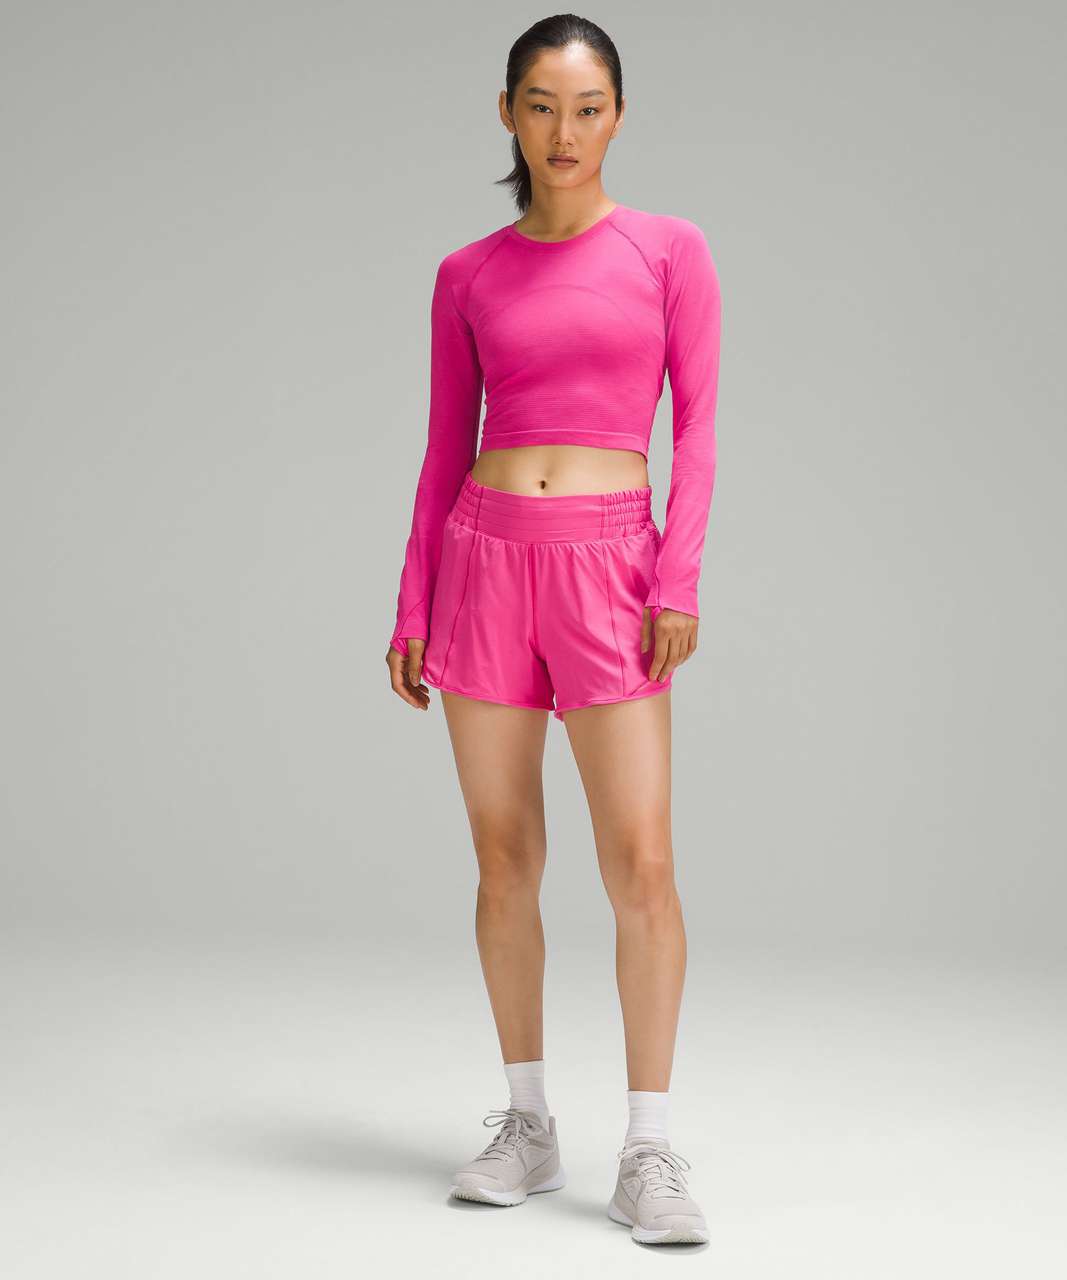 lululemon athletica Swiftly Tech Cropped Long-sleeve Shirt 2.0 in Pink